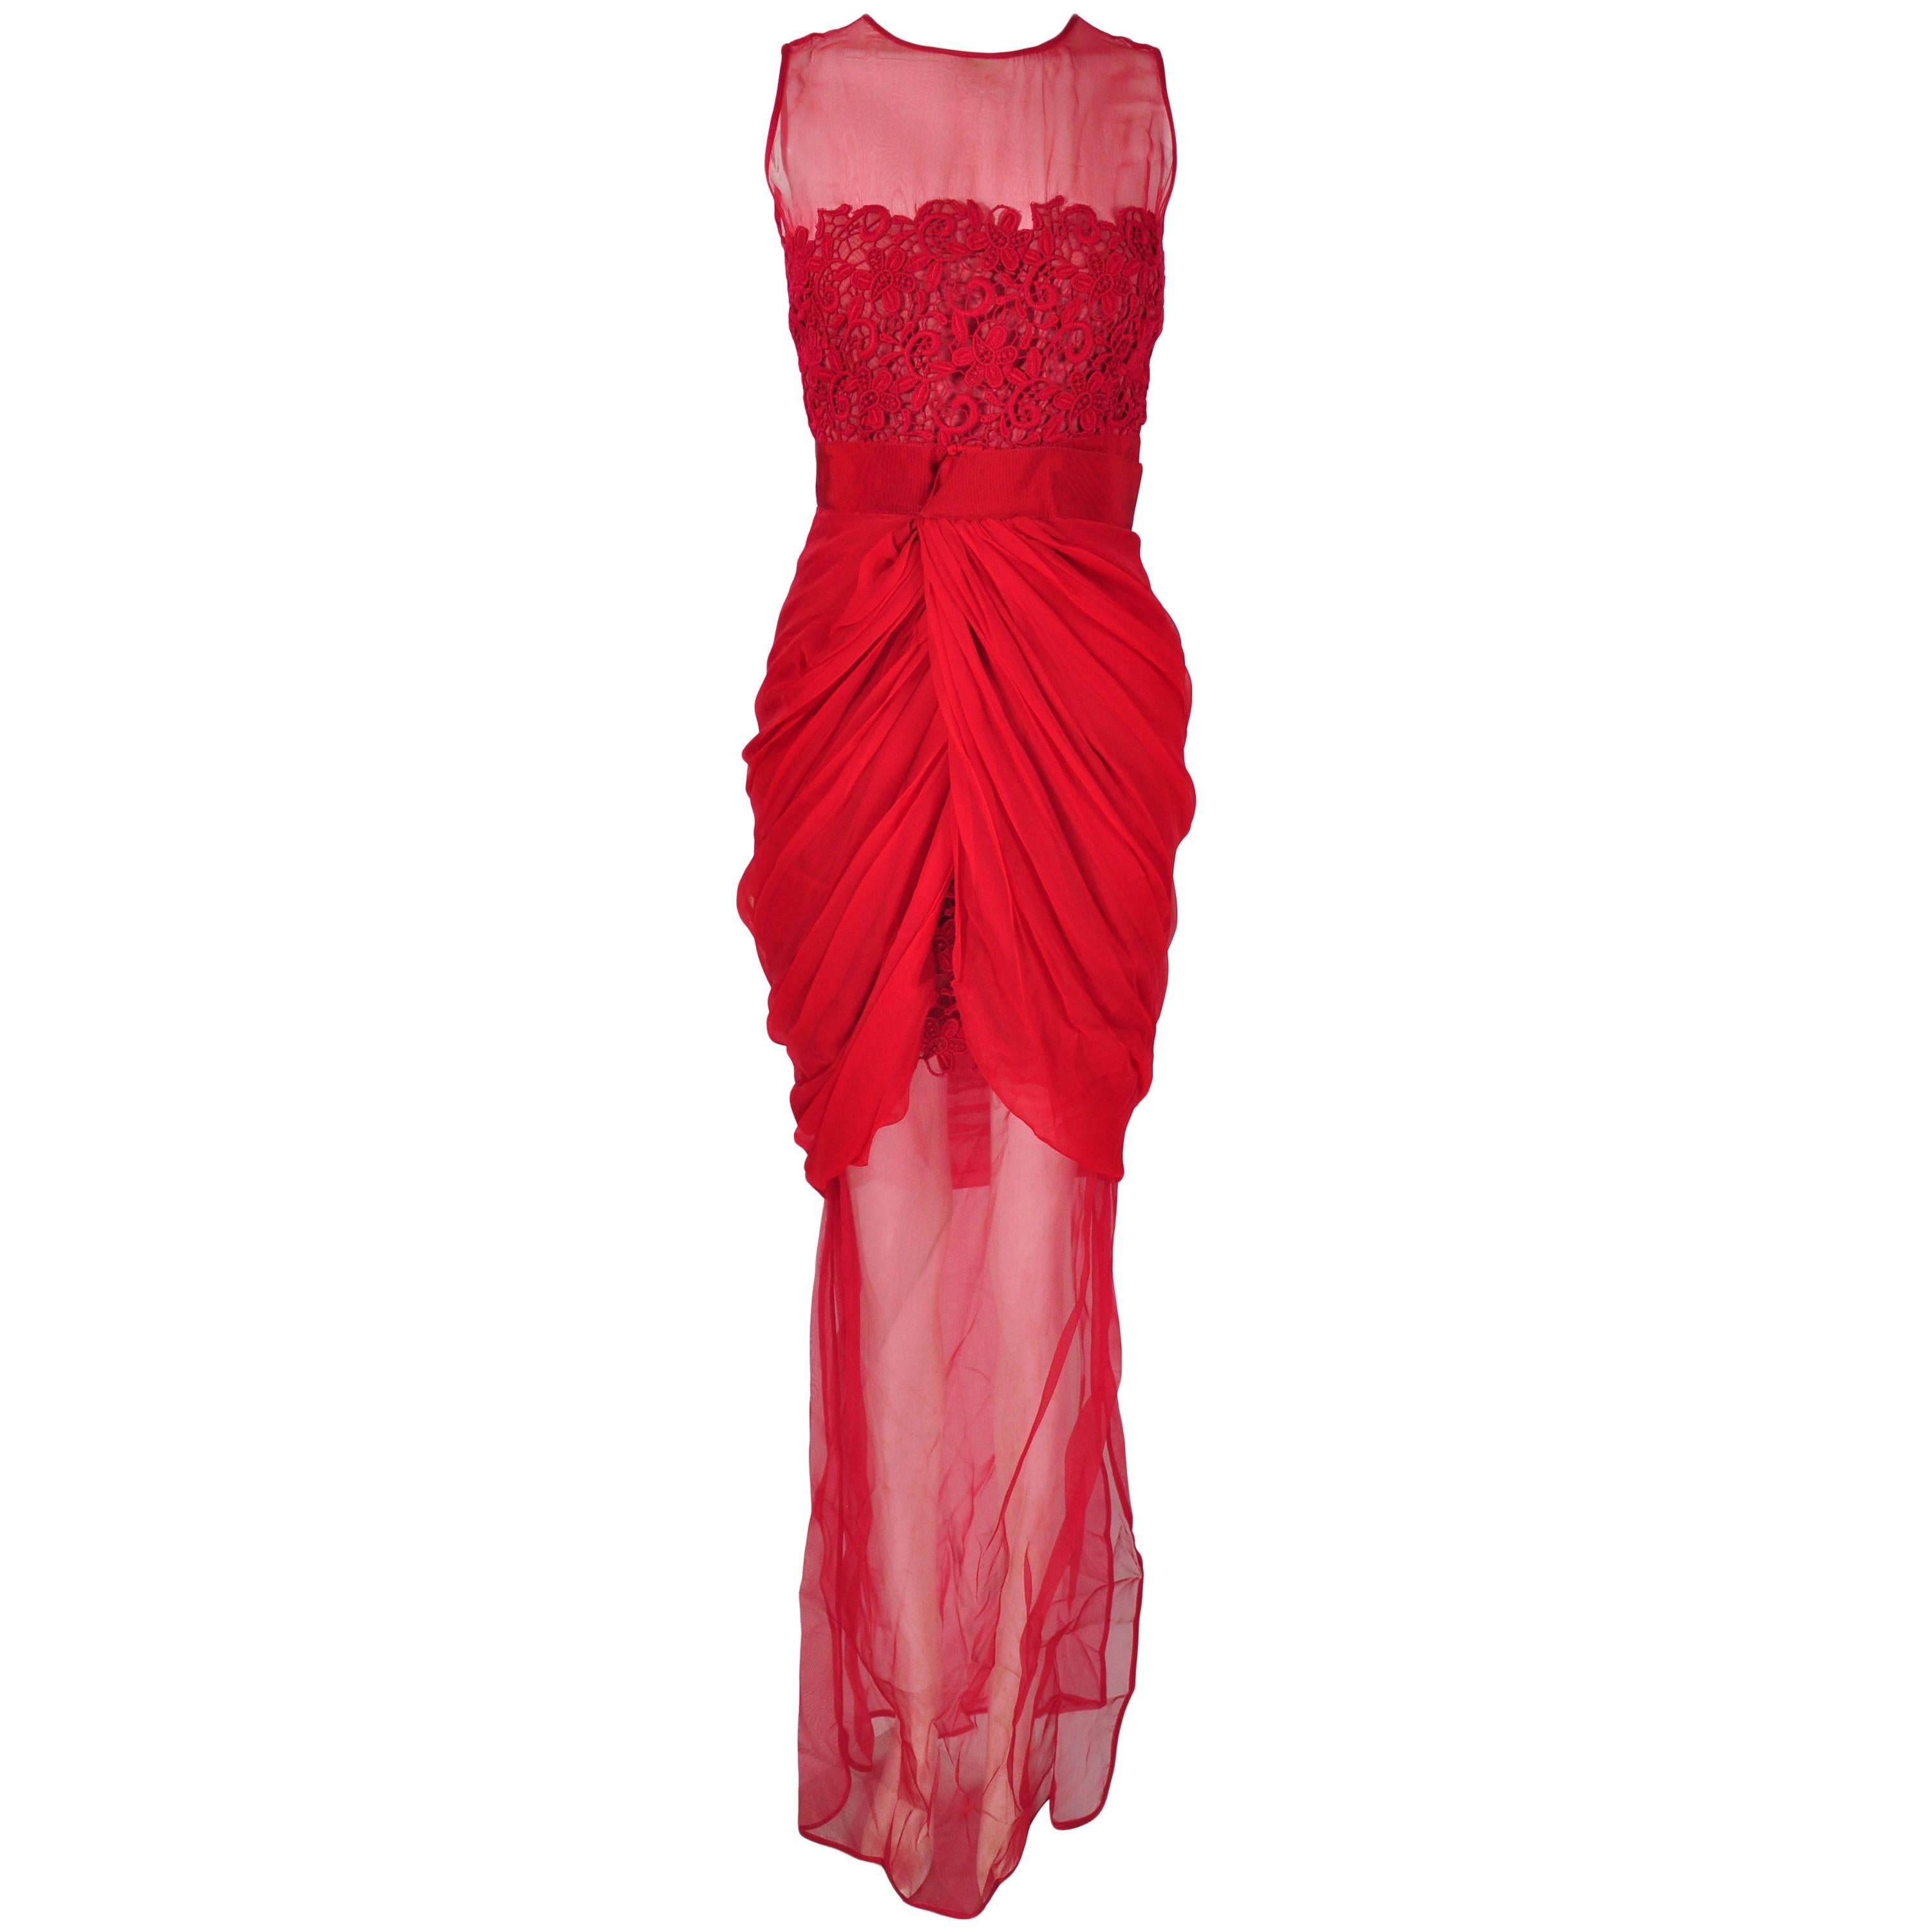 Giambattista Valli Red & Sheer Guipure Lace Appliqued Evening Dress For Sale